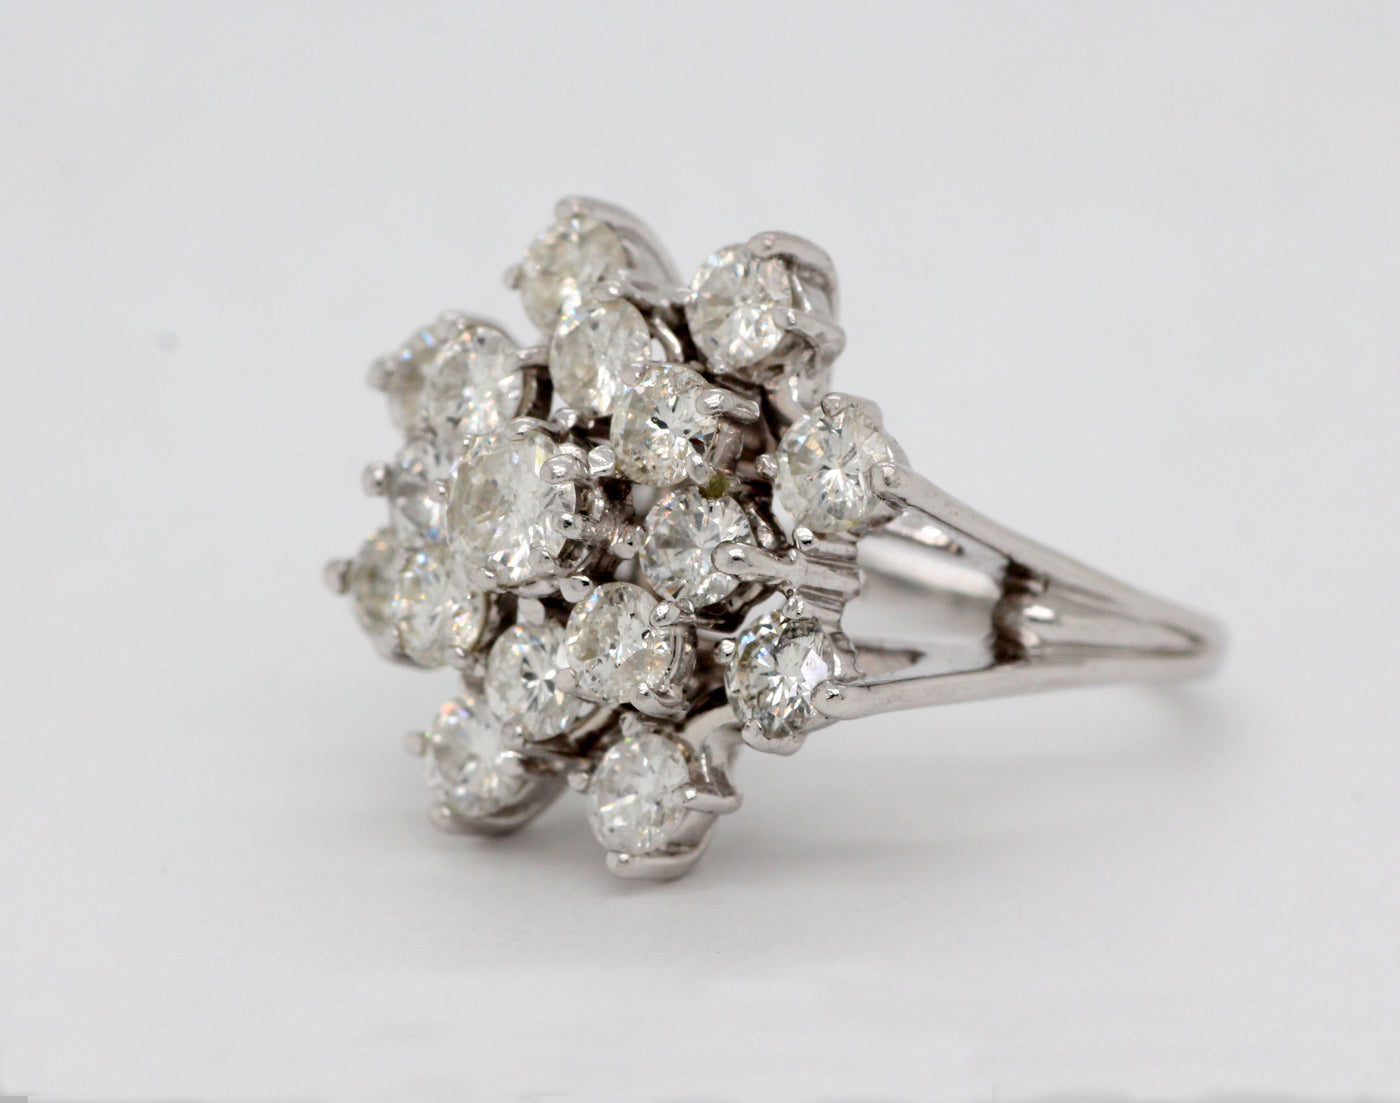 Estate 14KW 2.50 Cttw Diamond Ring HI in Color and SI2 in Clarity